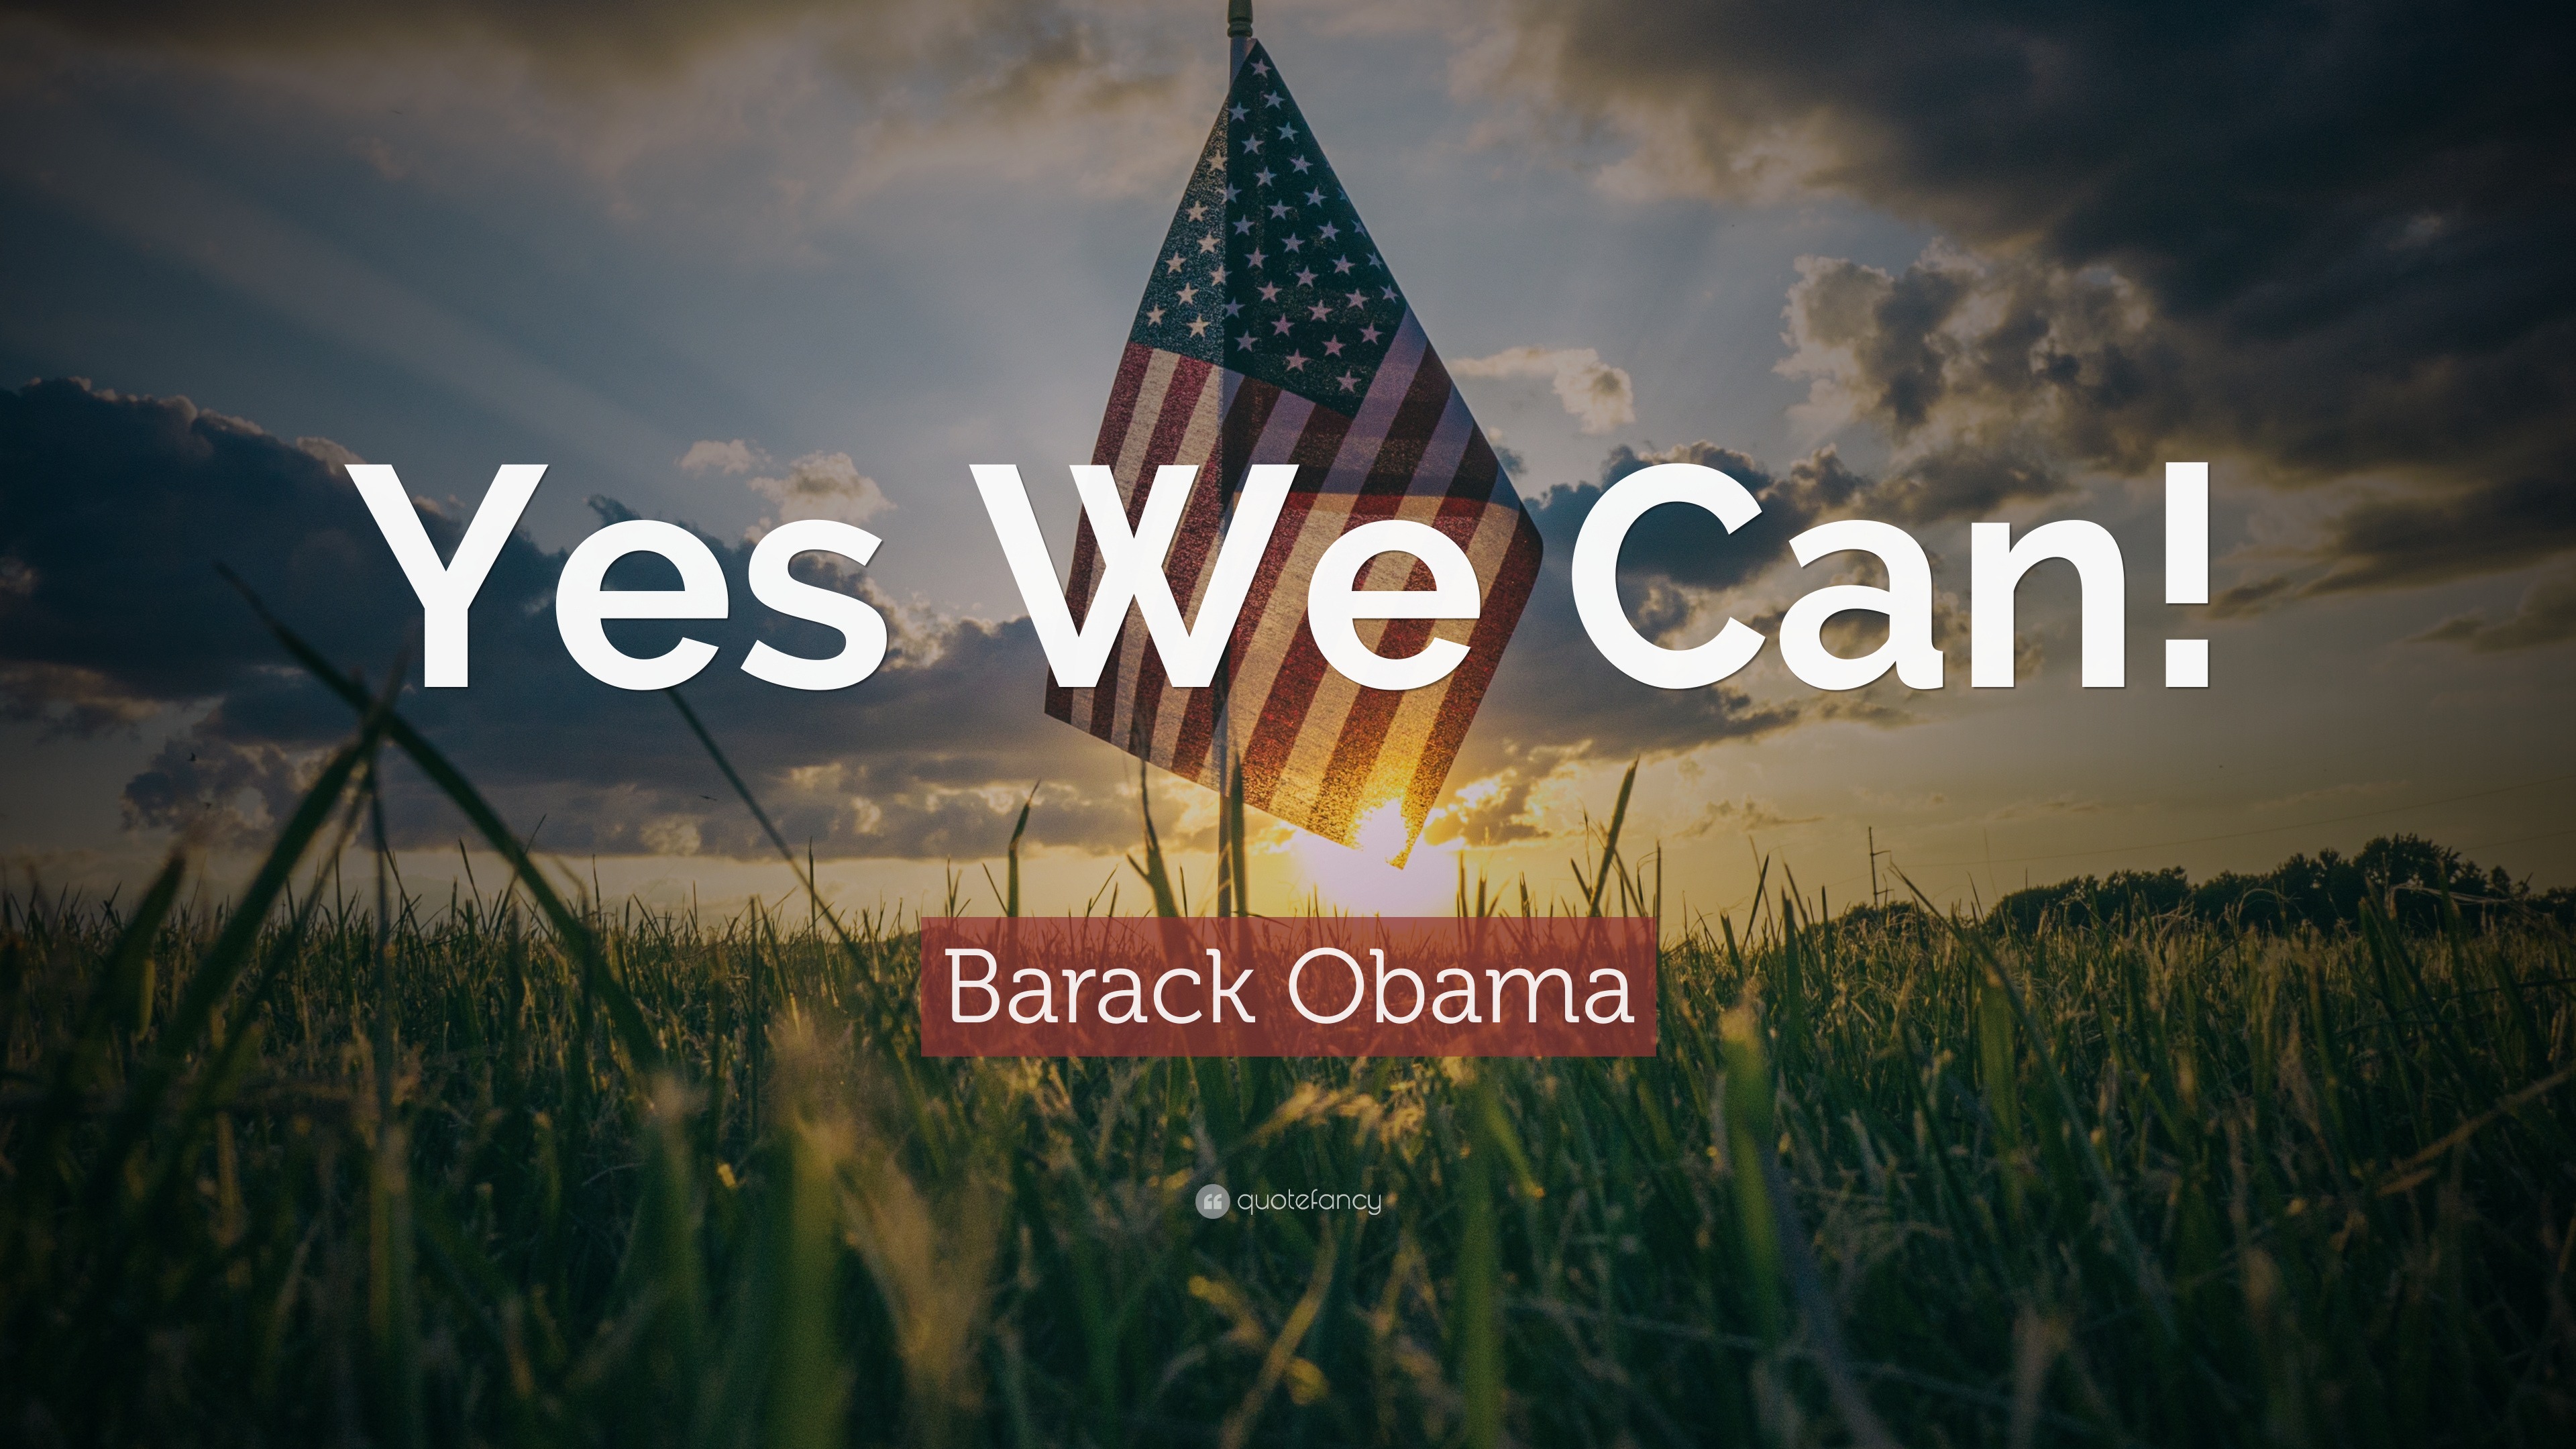 Yes we can Obama. Yes we can. Yes you can.